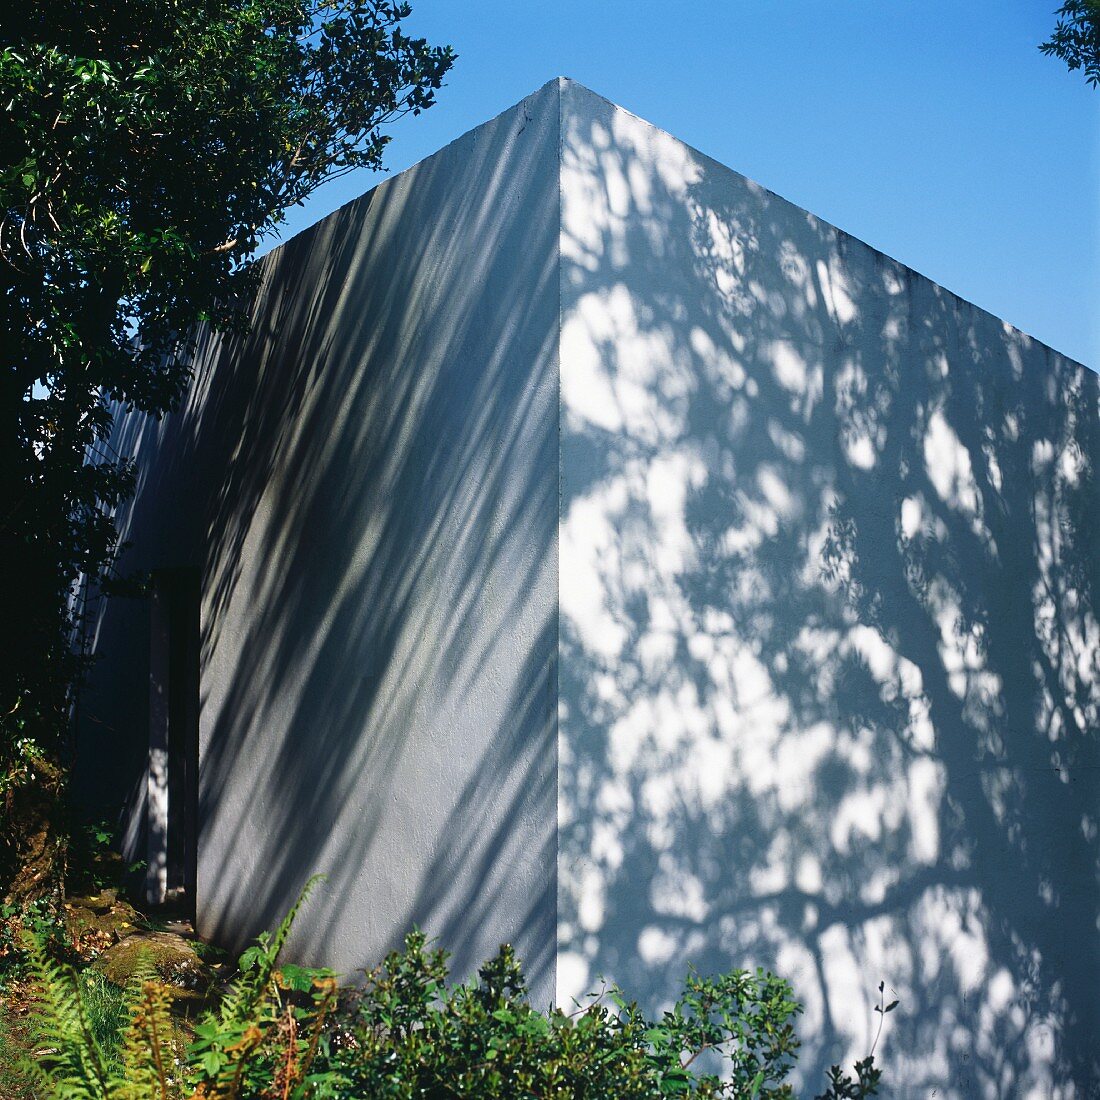 White, cubic building embedded in landscape with patterns of light and shade